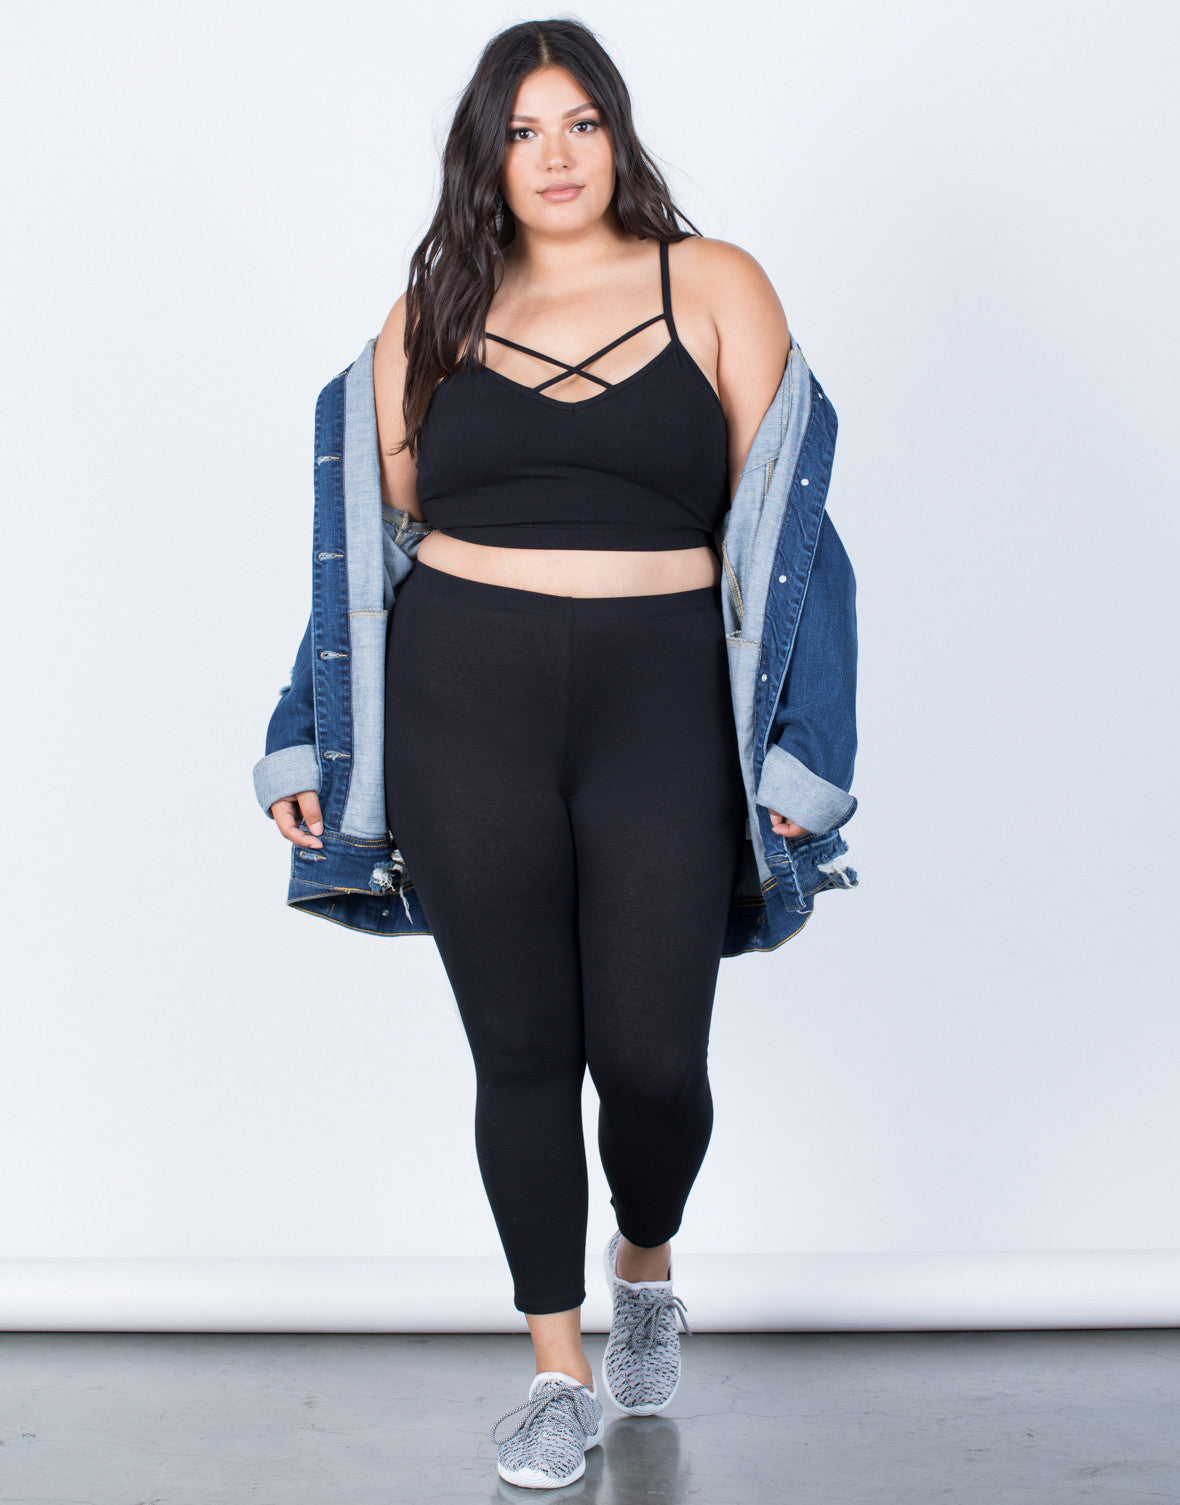 How To Style Plus Size Leggings